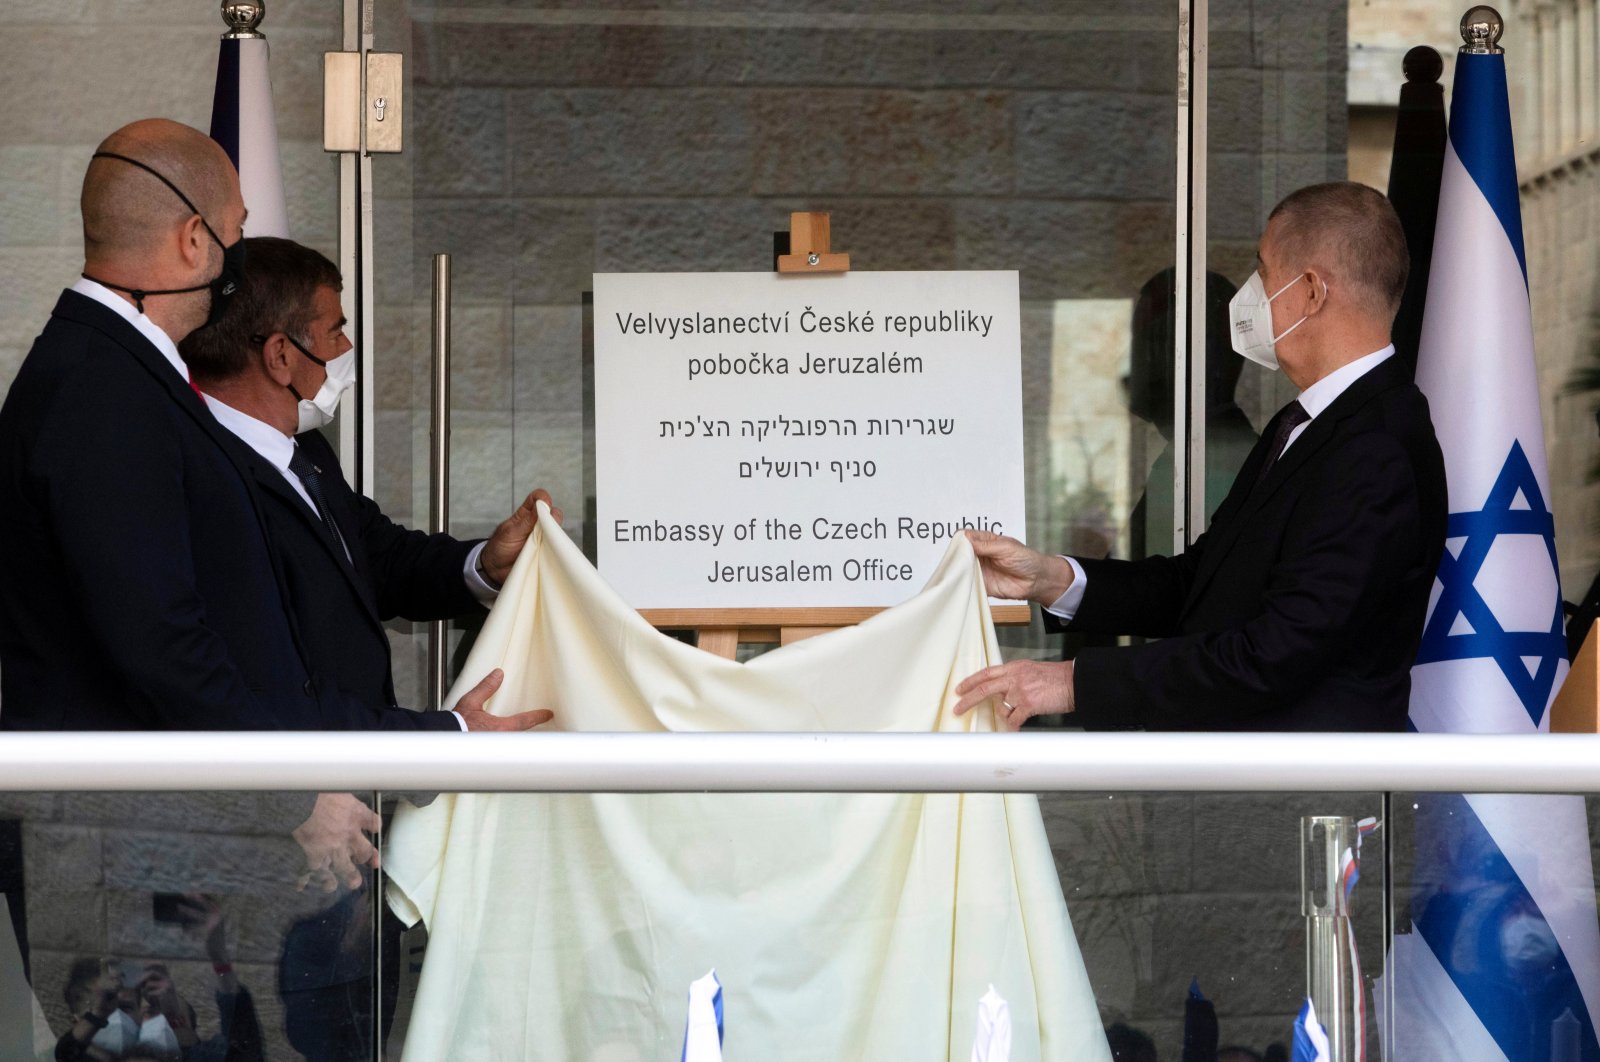 Czech Prime Minister Andrej Babis, Israeli Foreign Minister Gabi Ashkenazi and Israeli Public Security Minister Amir Ohana unveil a sign during an inauguration ceremony of a Czech diplomatic representation in Jerusalem, March 11, 2021. (Reuters)